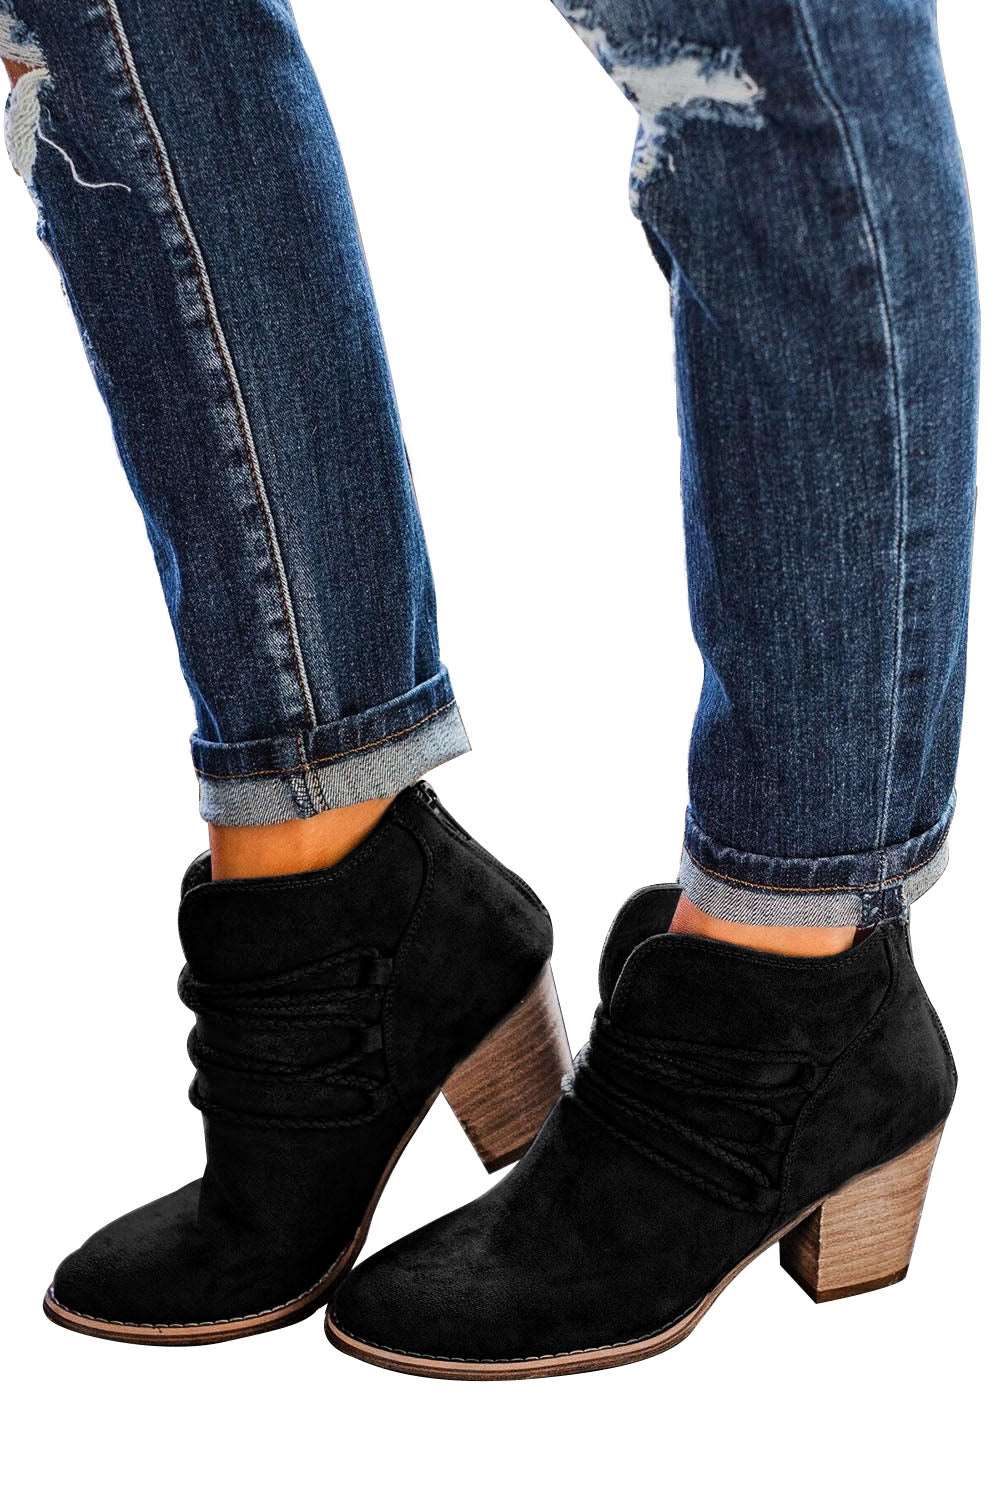 Black Criss Cross Slip On Point Toe Heeled Boots - Bellisima Clothing Collective